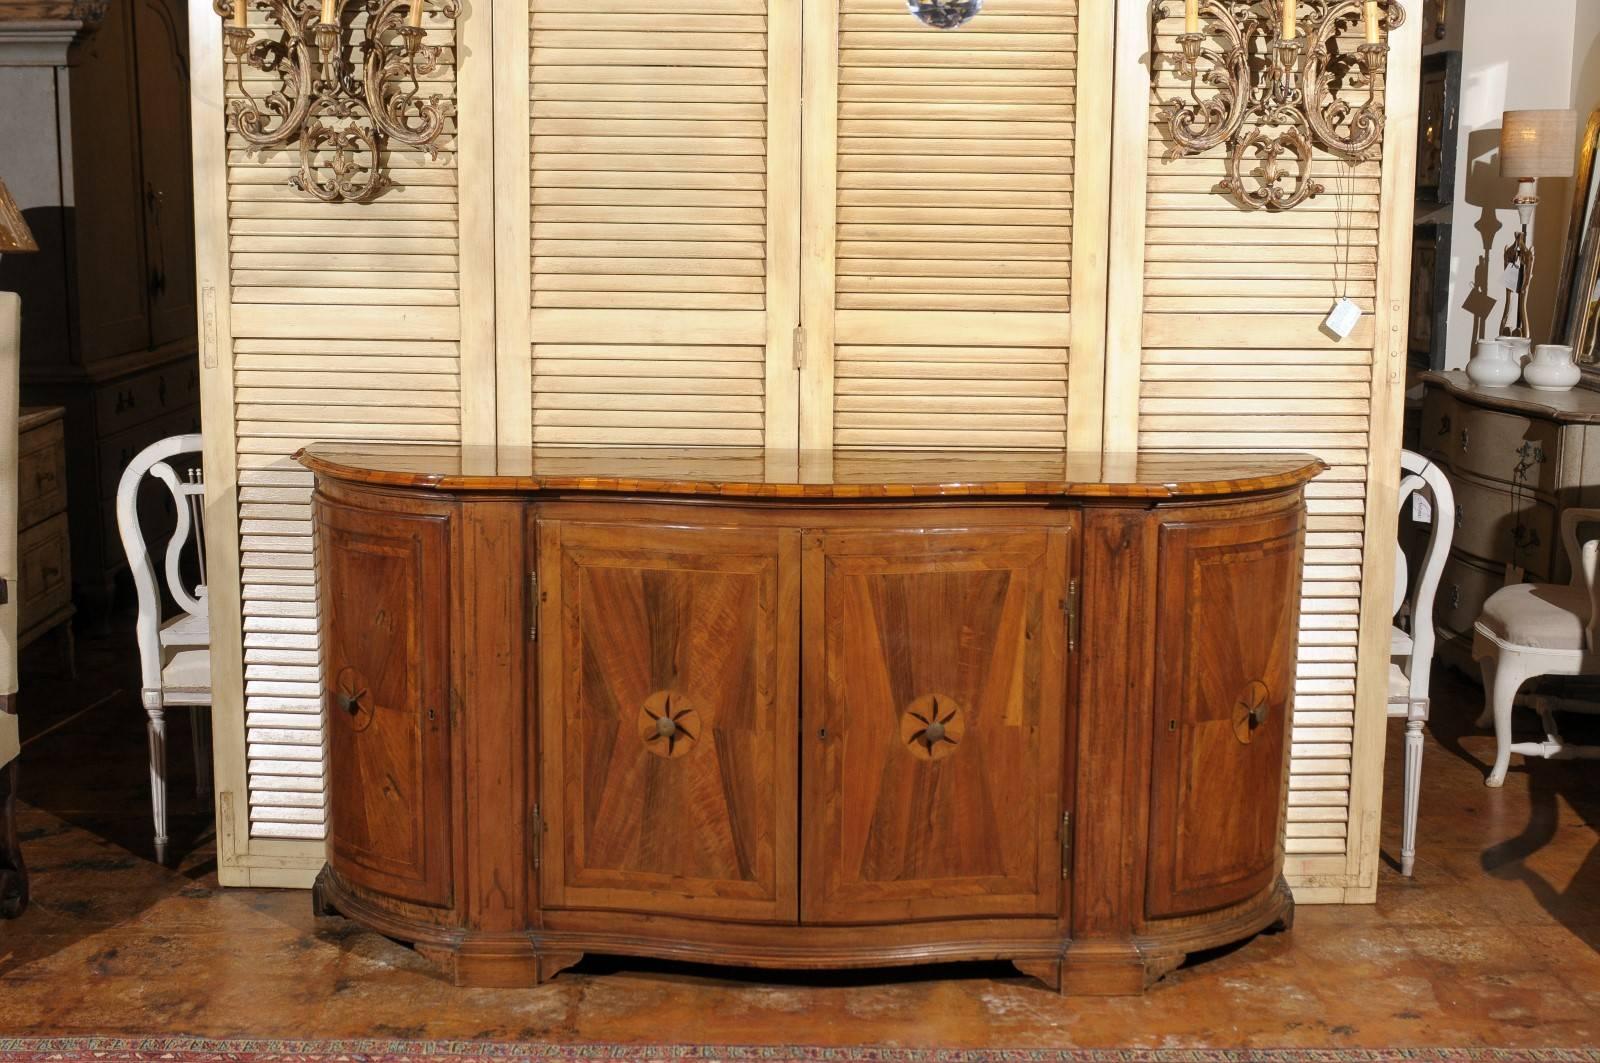 19th Century Italian 1860s Walnut, Satinwood and Ebony Inlaid Credenza with Serpentine Front